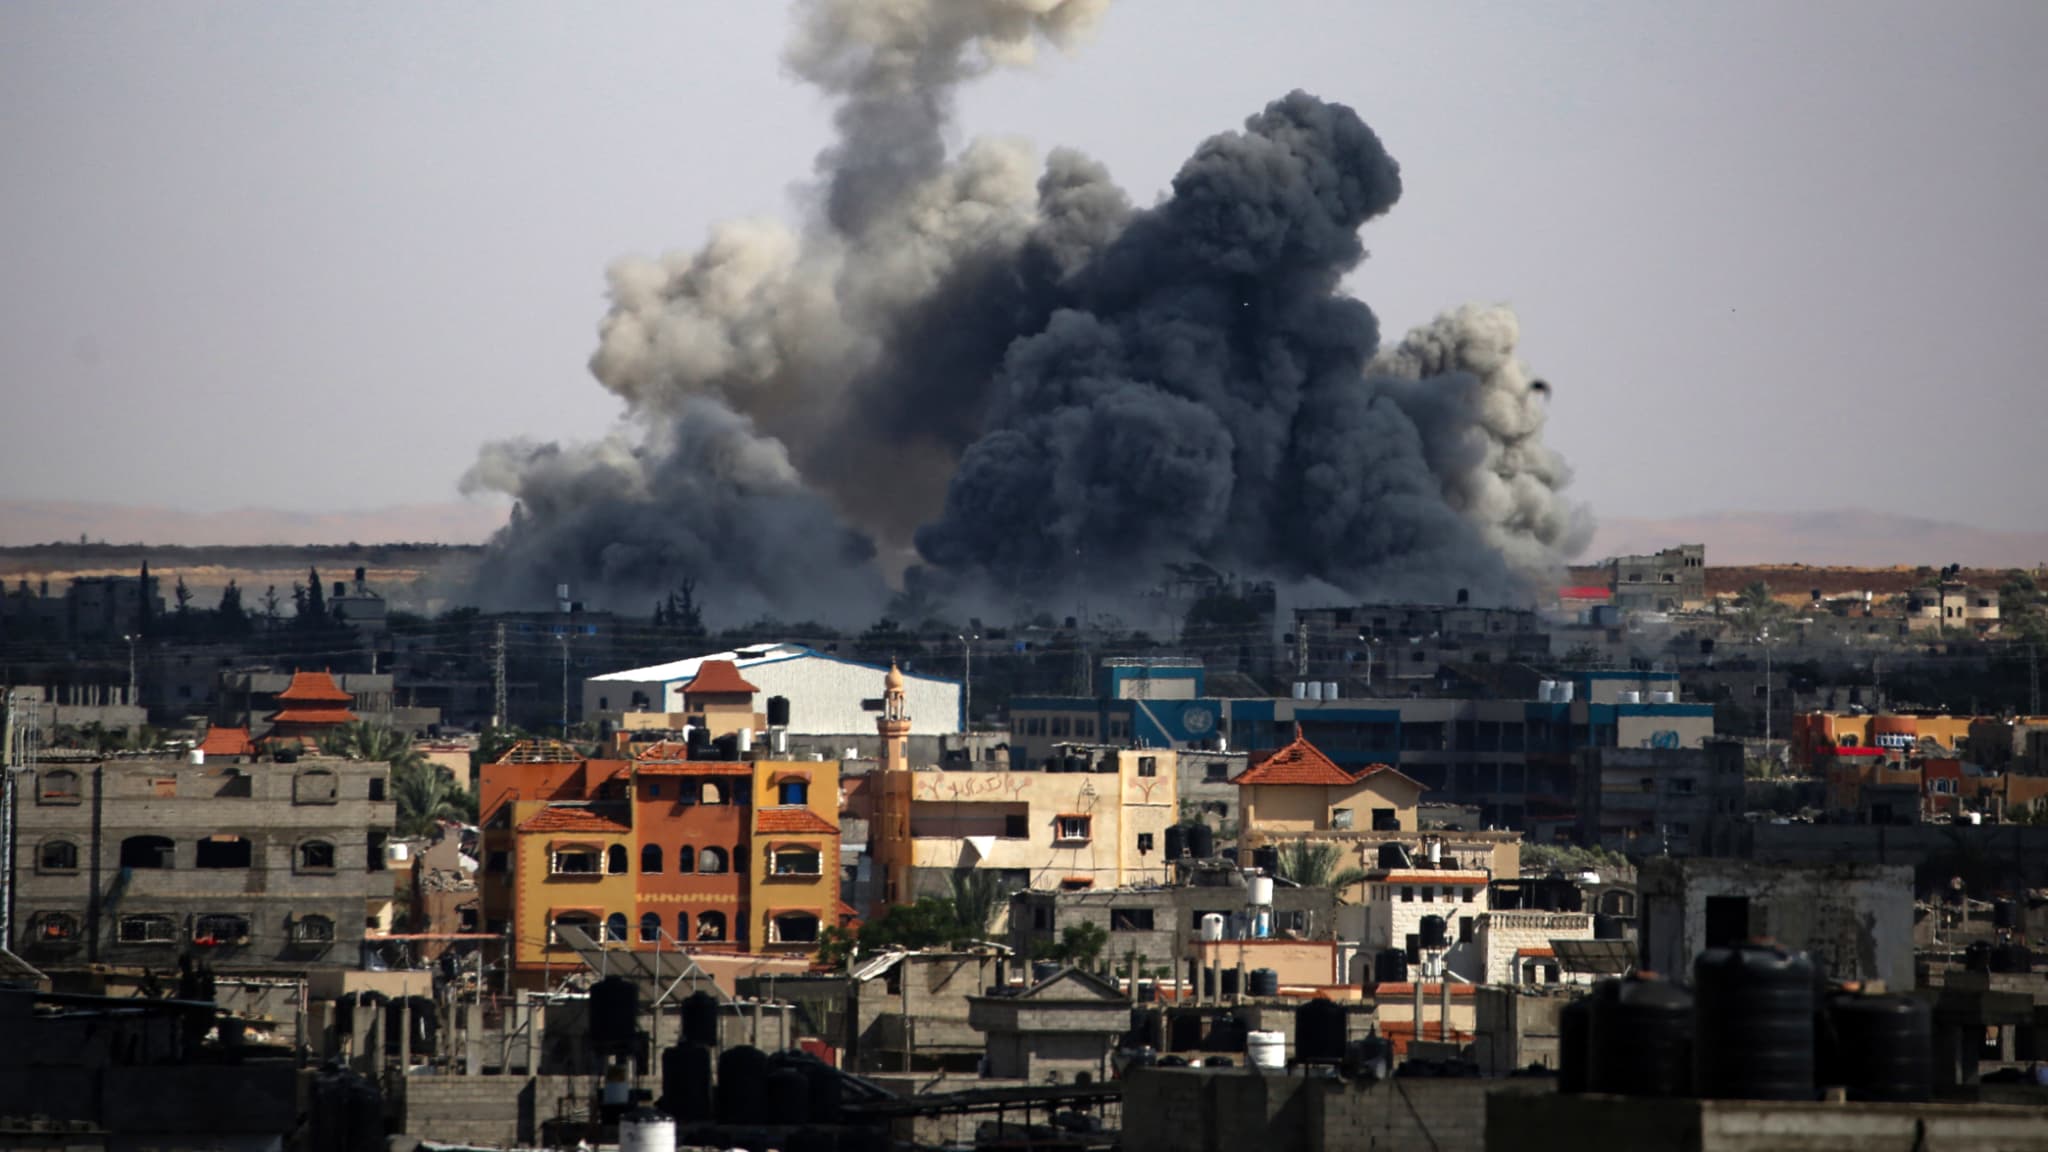 Hamas approves cease-fire proposal, evacuation of civilians in Rafah underway